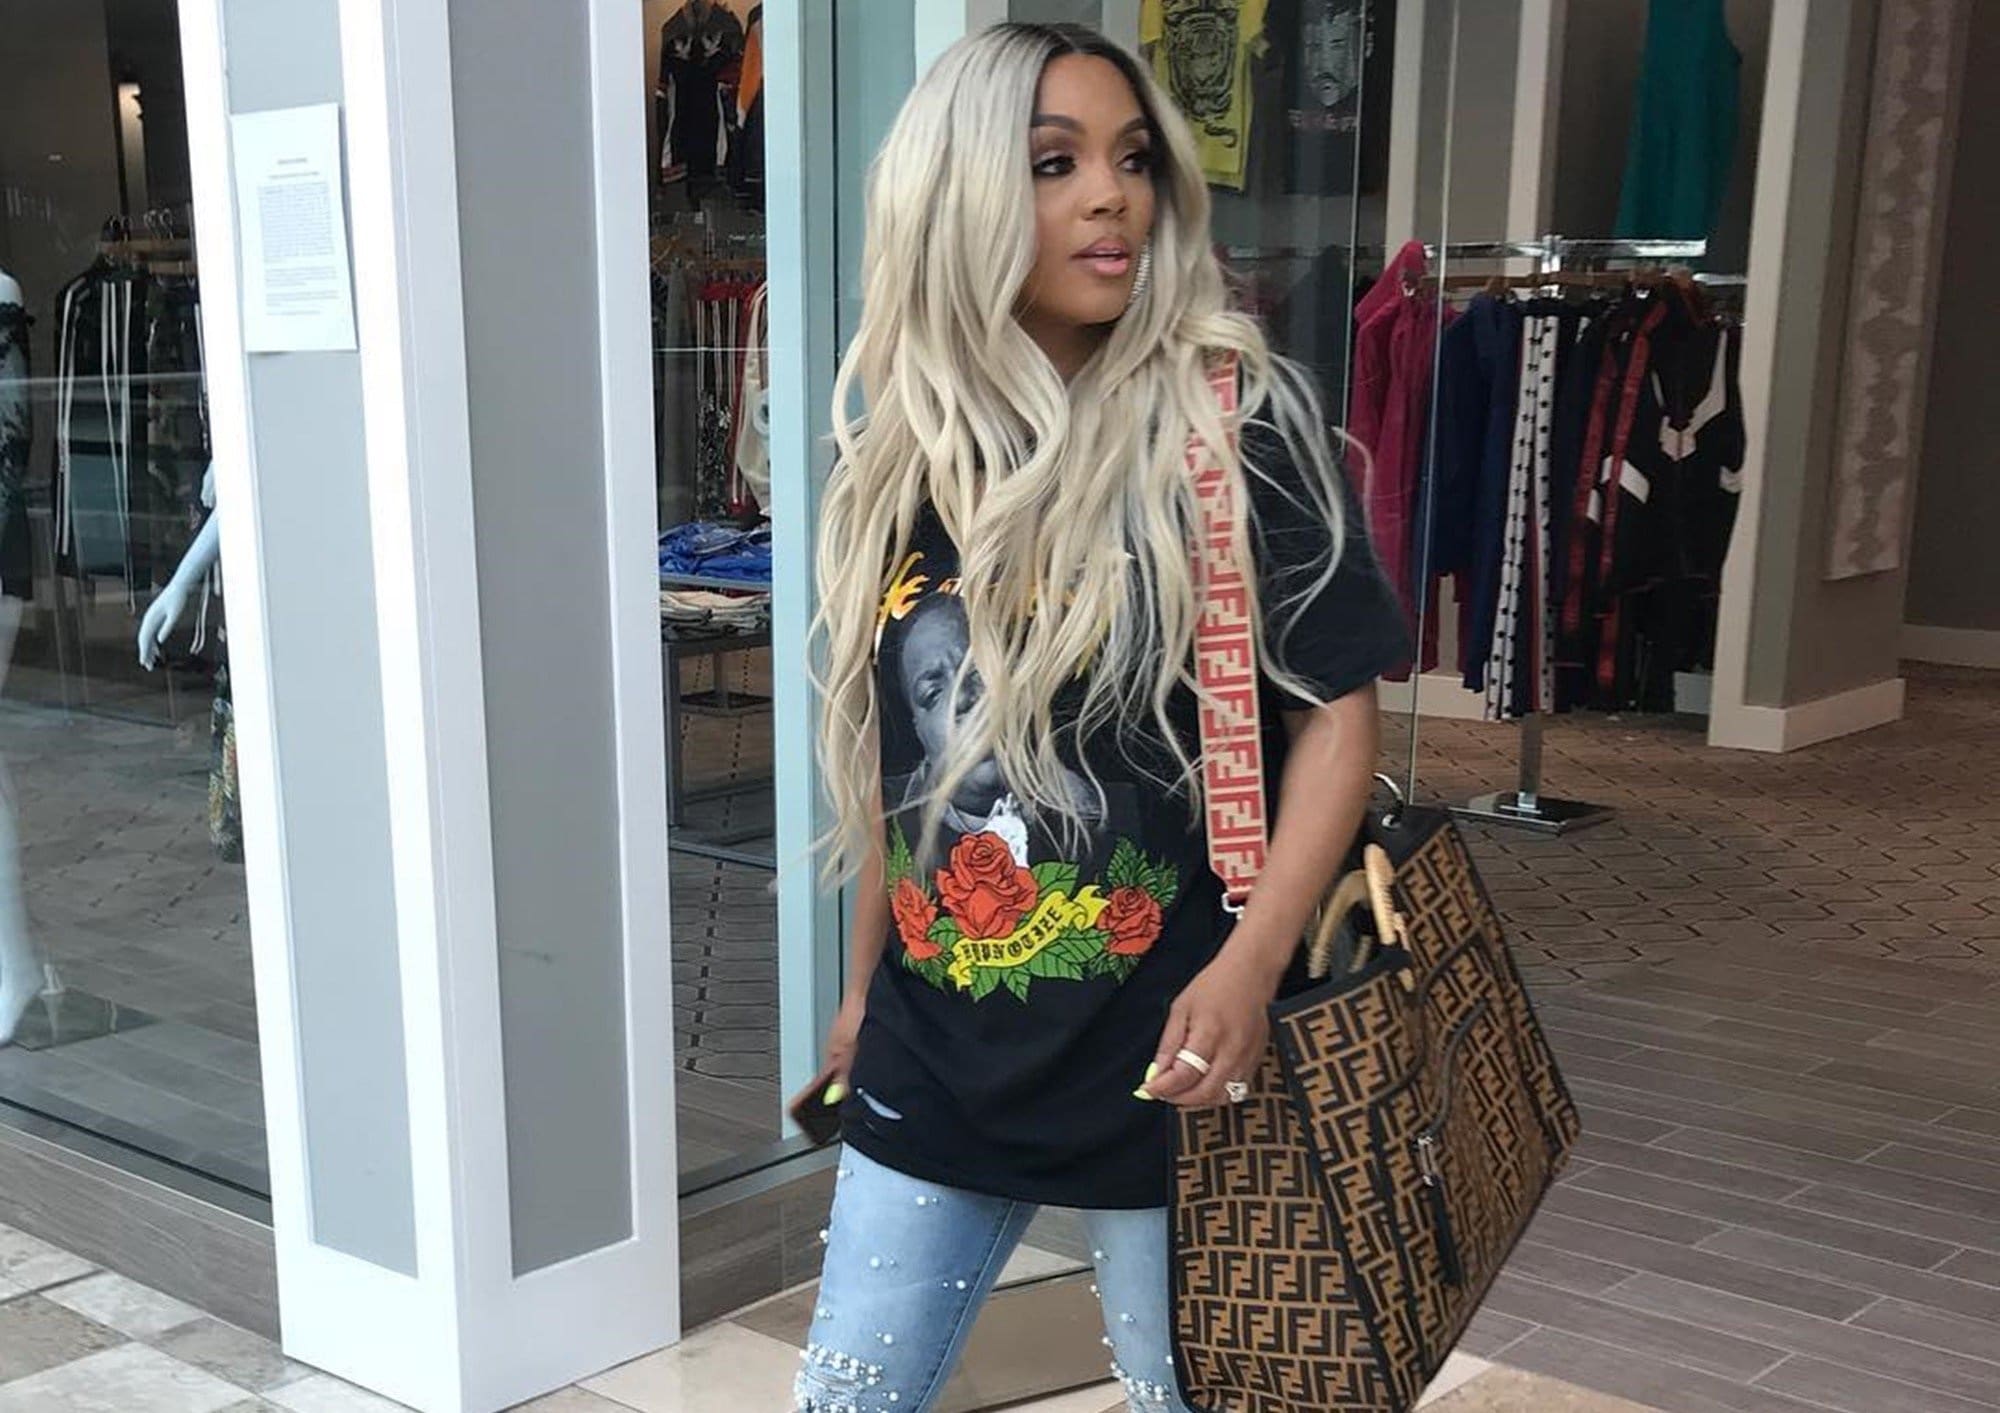 Rasheeda Frost Was A Speaker At The 'Sunday Brunch With A Boss' Event - See The Videos